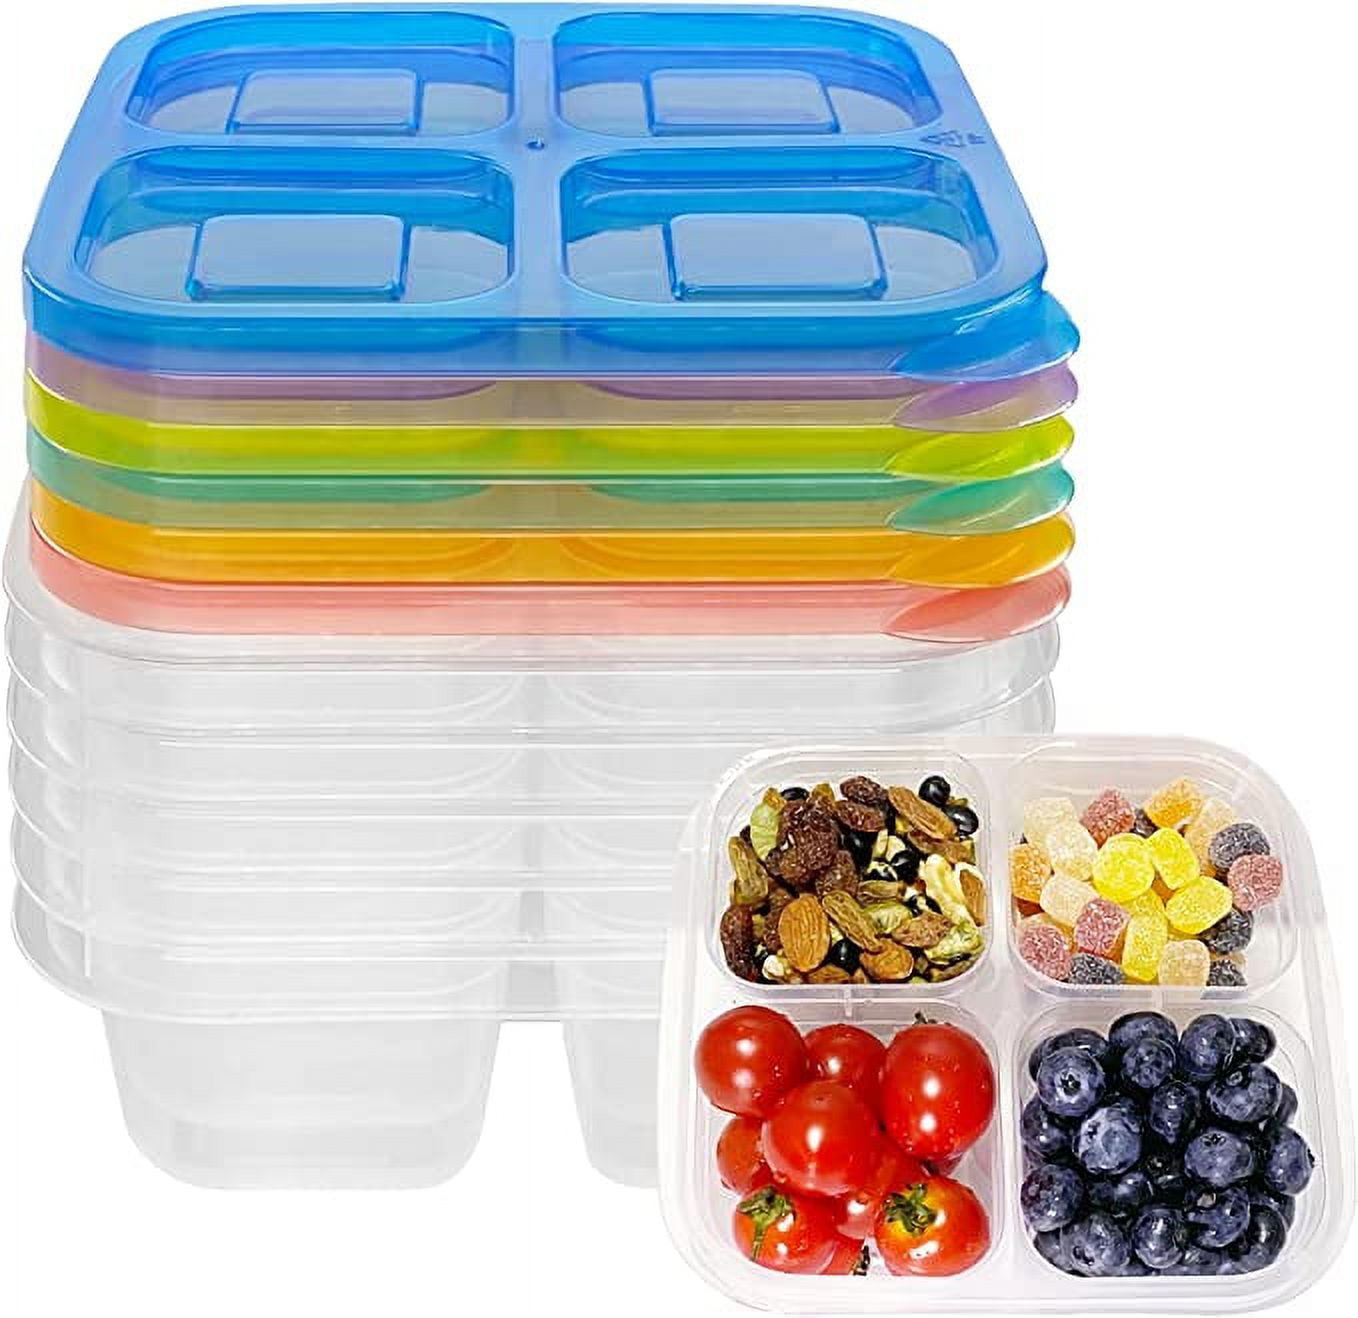 4-Compartment Snack Bento Boxes, Set of 6 Reusable Food Containers for  School,Work and Picnic,Portable Snack Box, Meal Prep Container (Dark Color  Set) 